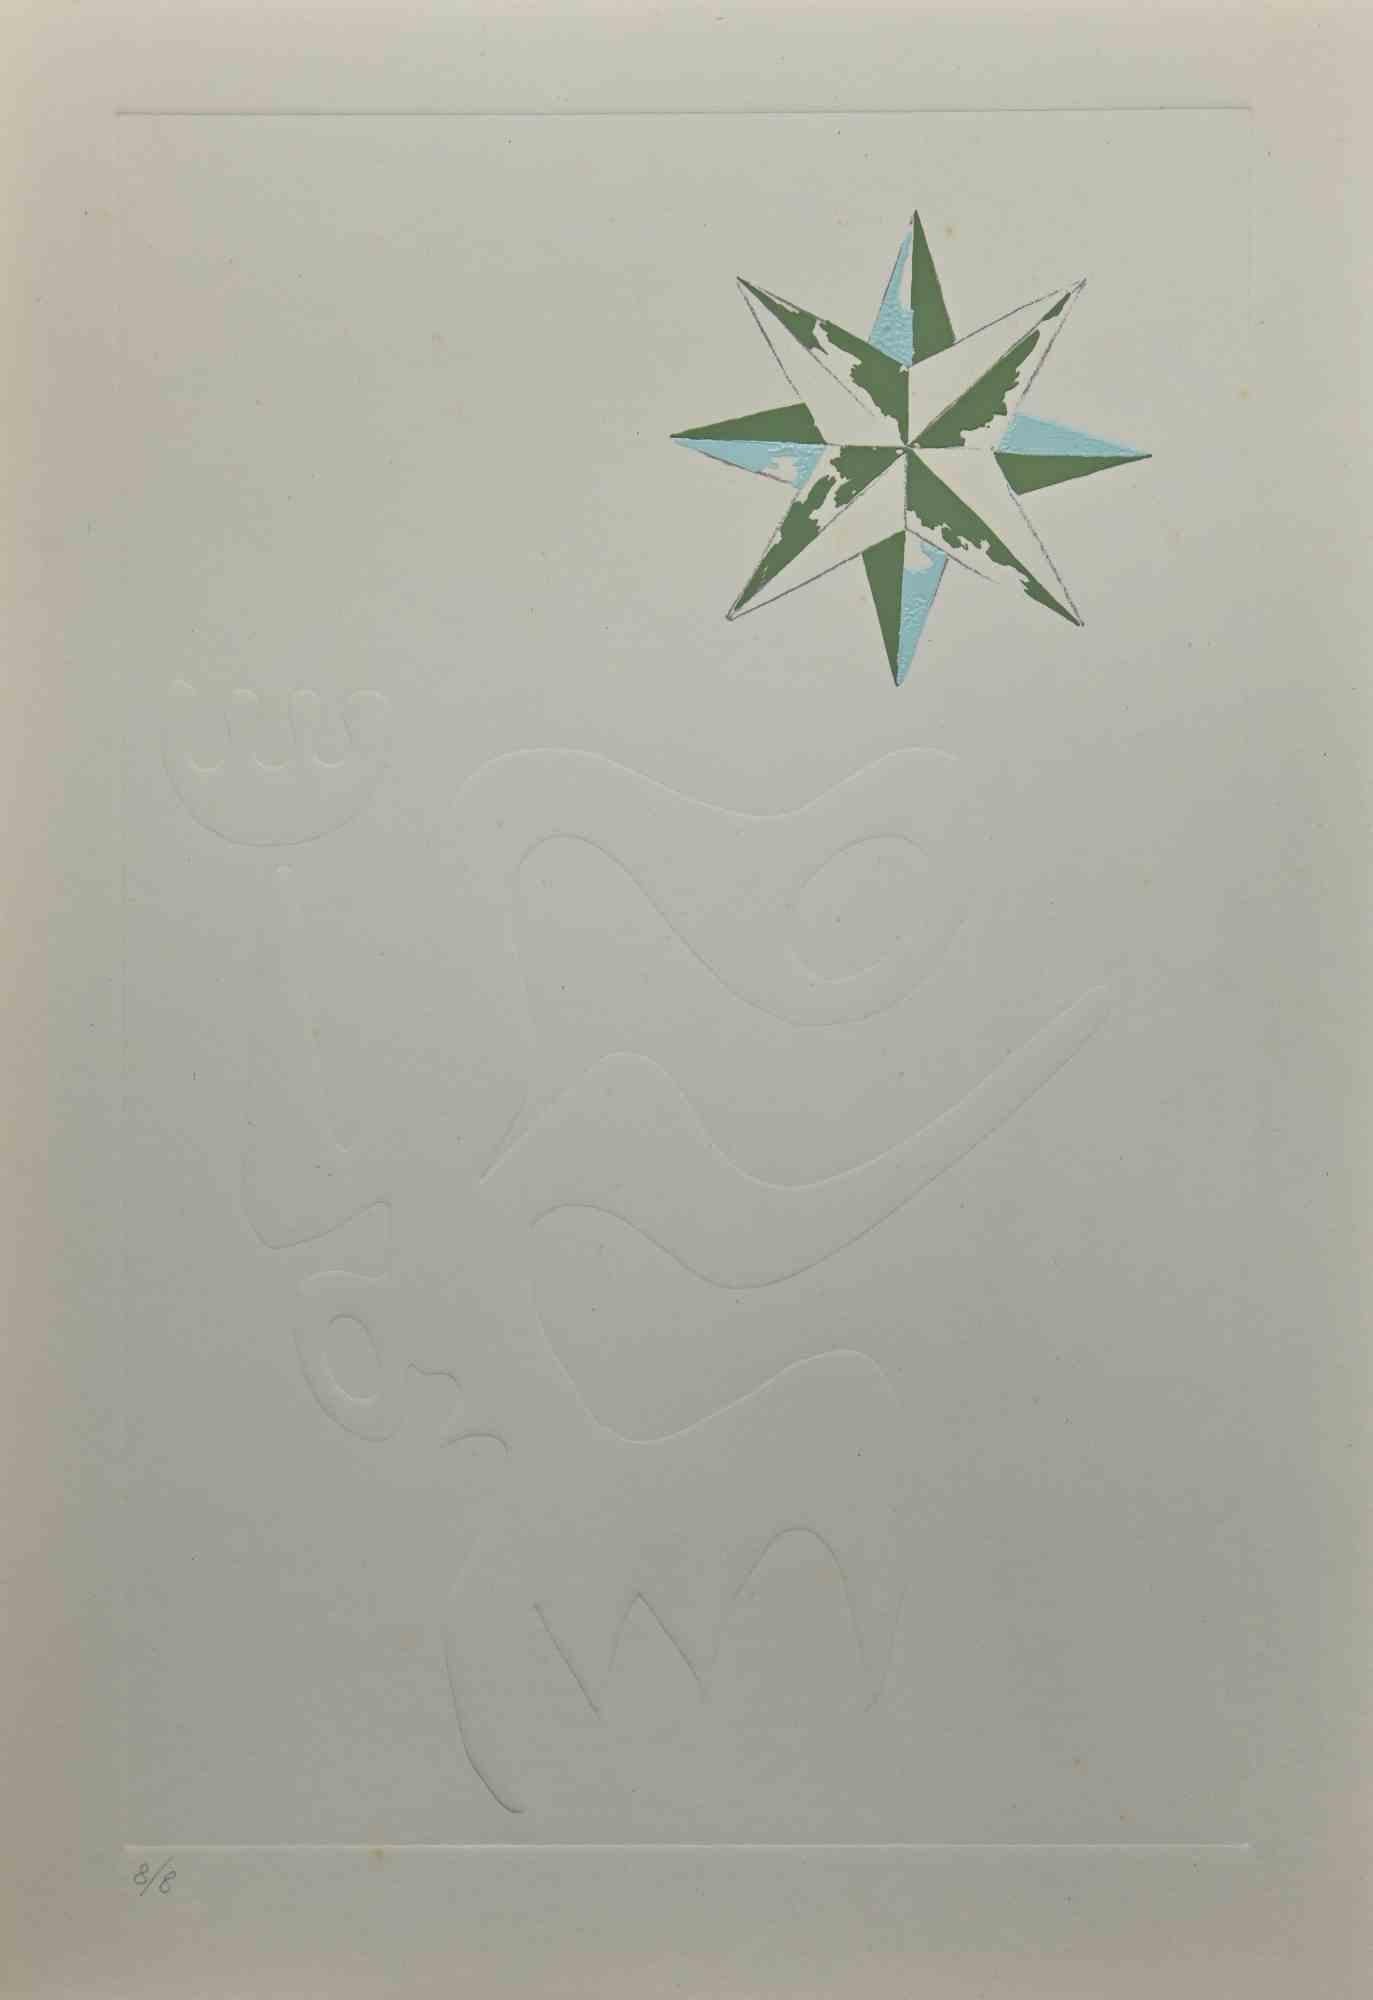 Wind Rose is an Original Screen Print and Embossing realized by Leo Guida in 1970s.

Good condition, no signature.

Artist sensitive to current issues, artistic movements and historical techniques, Leo Guida has been able to weave a productive